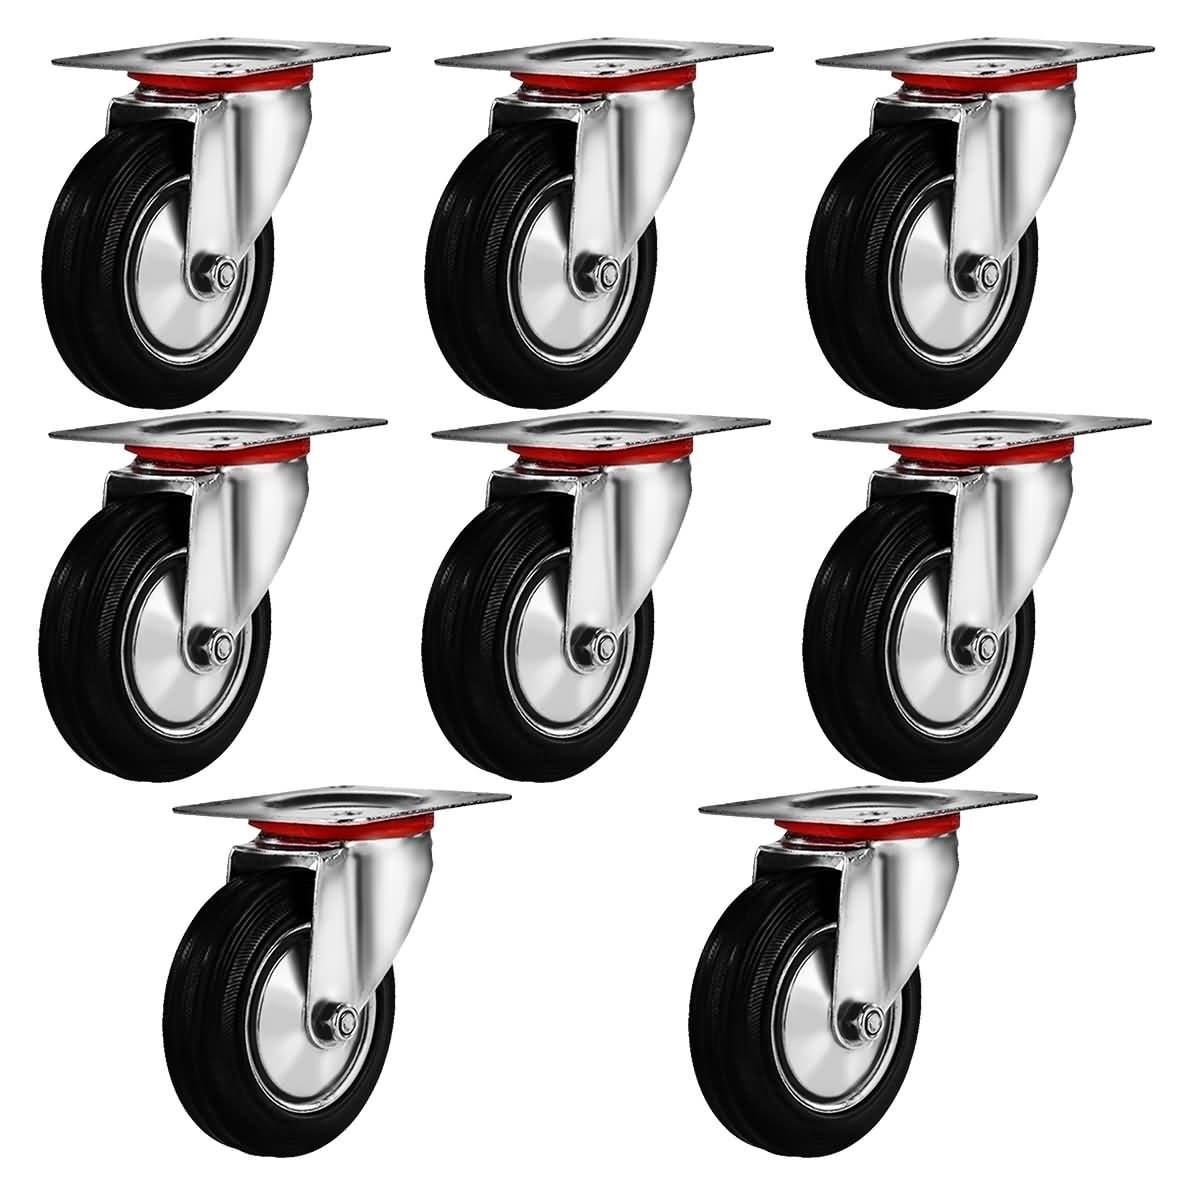 Accessbuy 2 Heavy Duty Caster Wheels PU Rubber Swivel Casters with 360 Degree Top Plate & Bearing Heavy Duty Pack of 4 2 inch Plate 